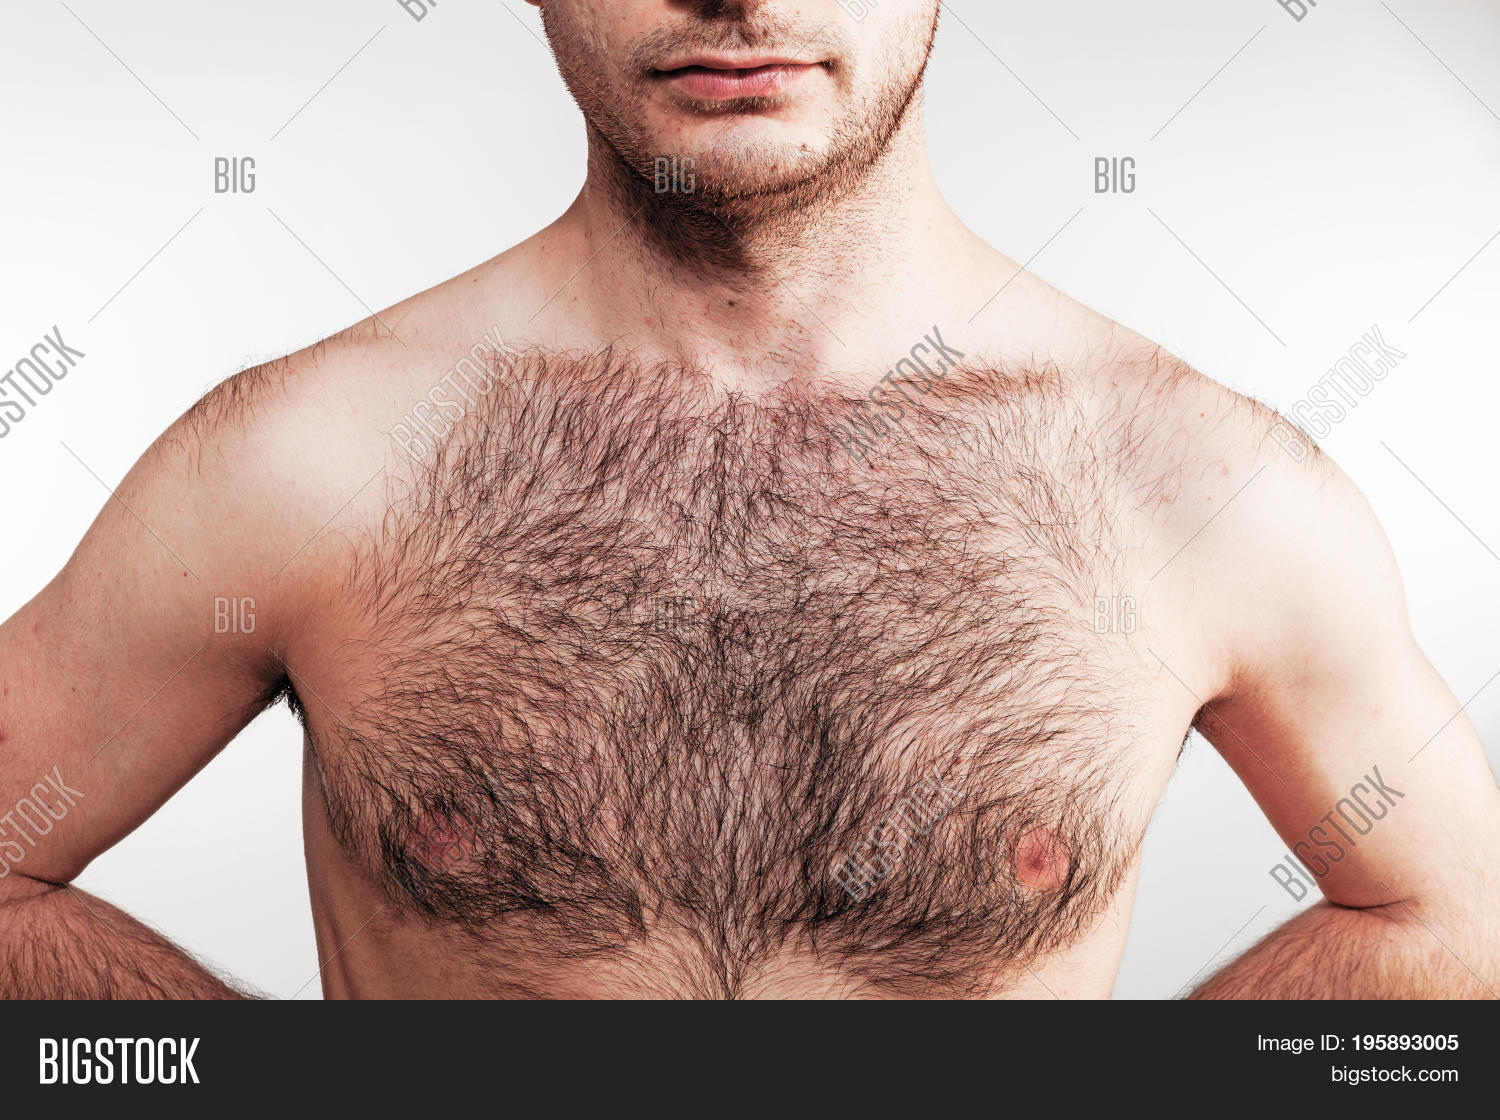 china dollz recommends Nude Men With Hairy Chests